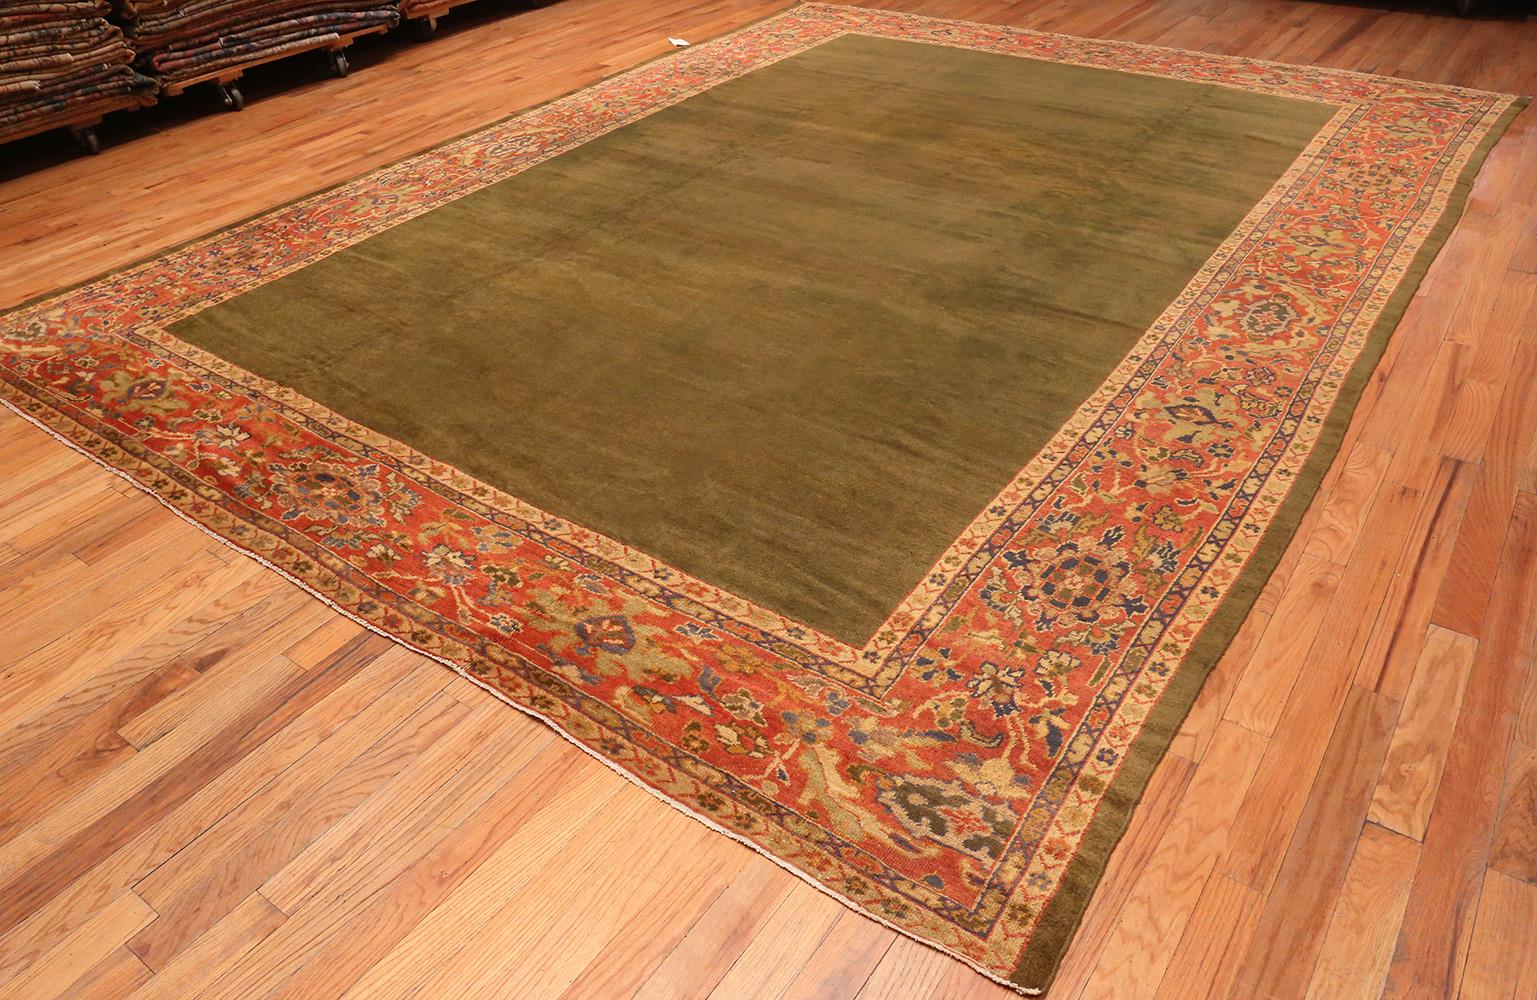 Antique Persian Sultanabad Rug, Country Of Origin: Persia, Circa Date: Late 19th Century. Size: 11 ft 6 in x 15 ft 6 in (3.51 m x 4.72 m)

This brilliant antique Persian Sultanabad rug from the late 19th century is meant to captivate the imagination